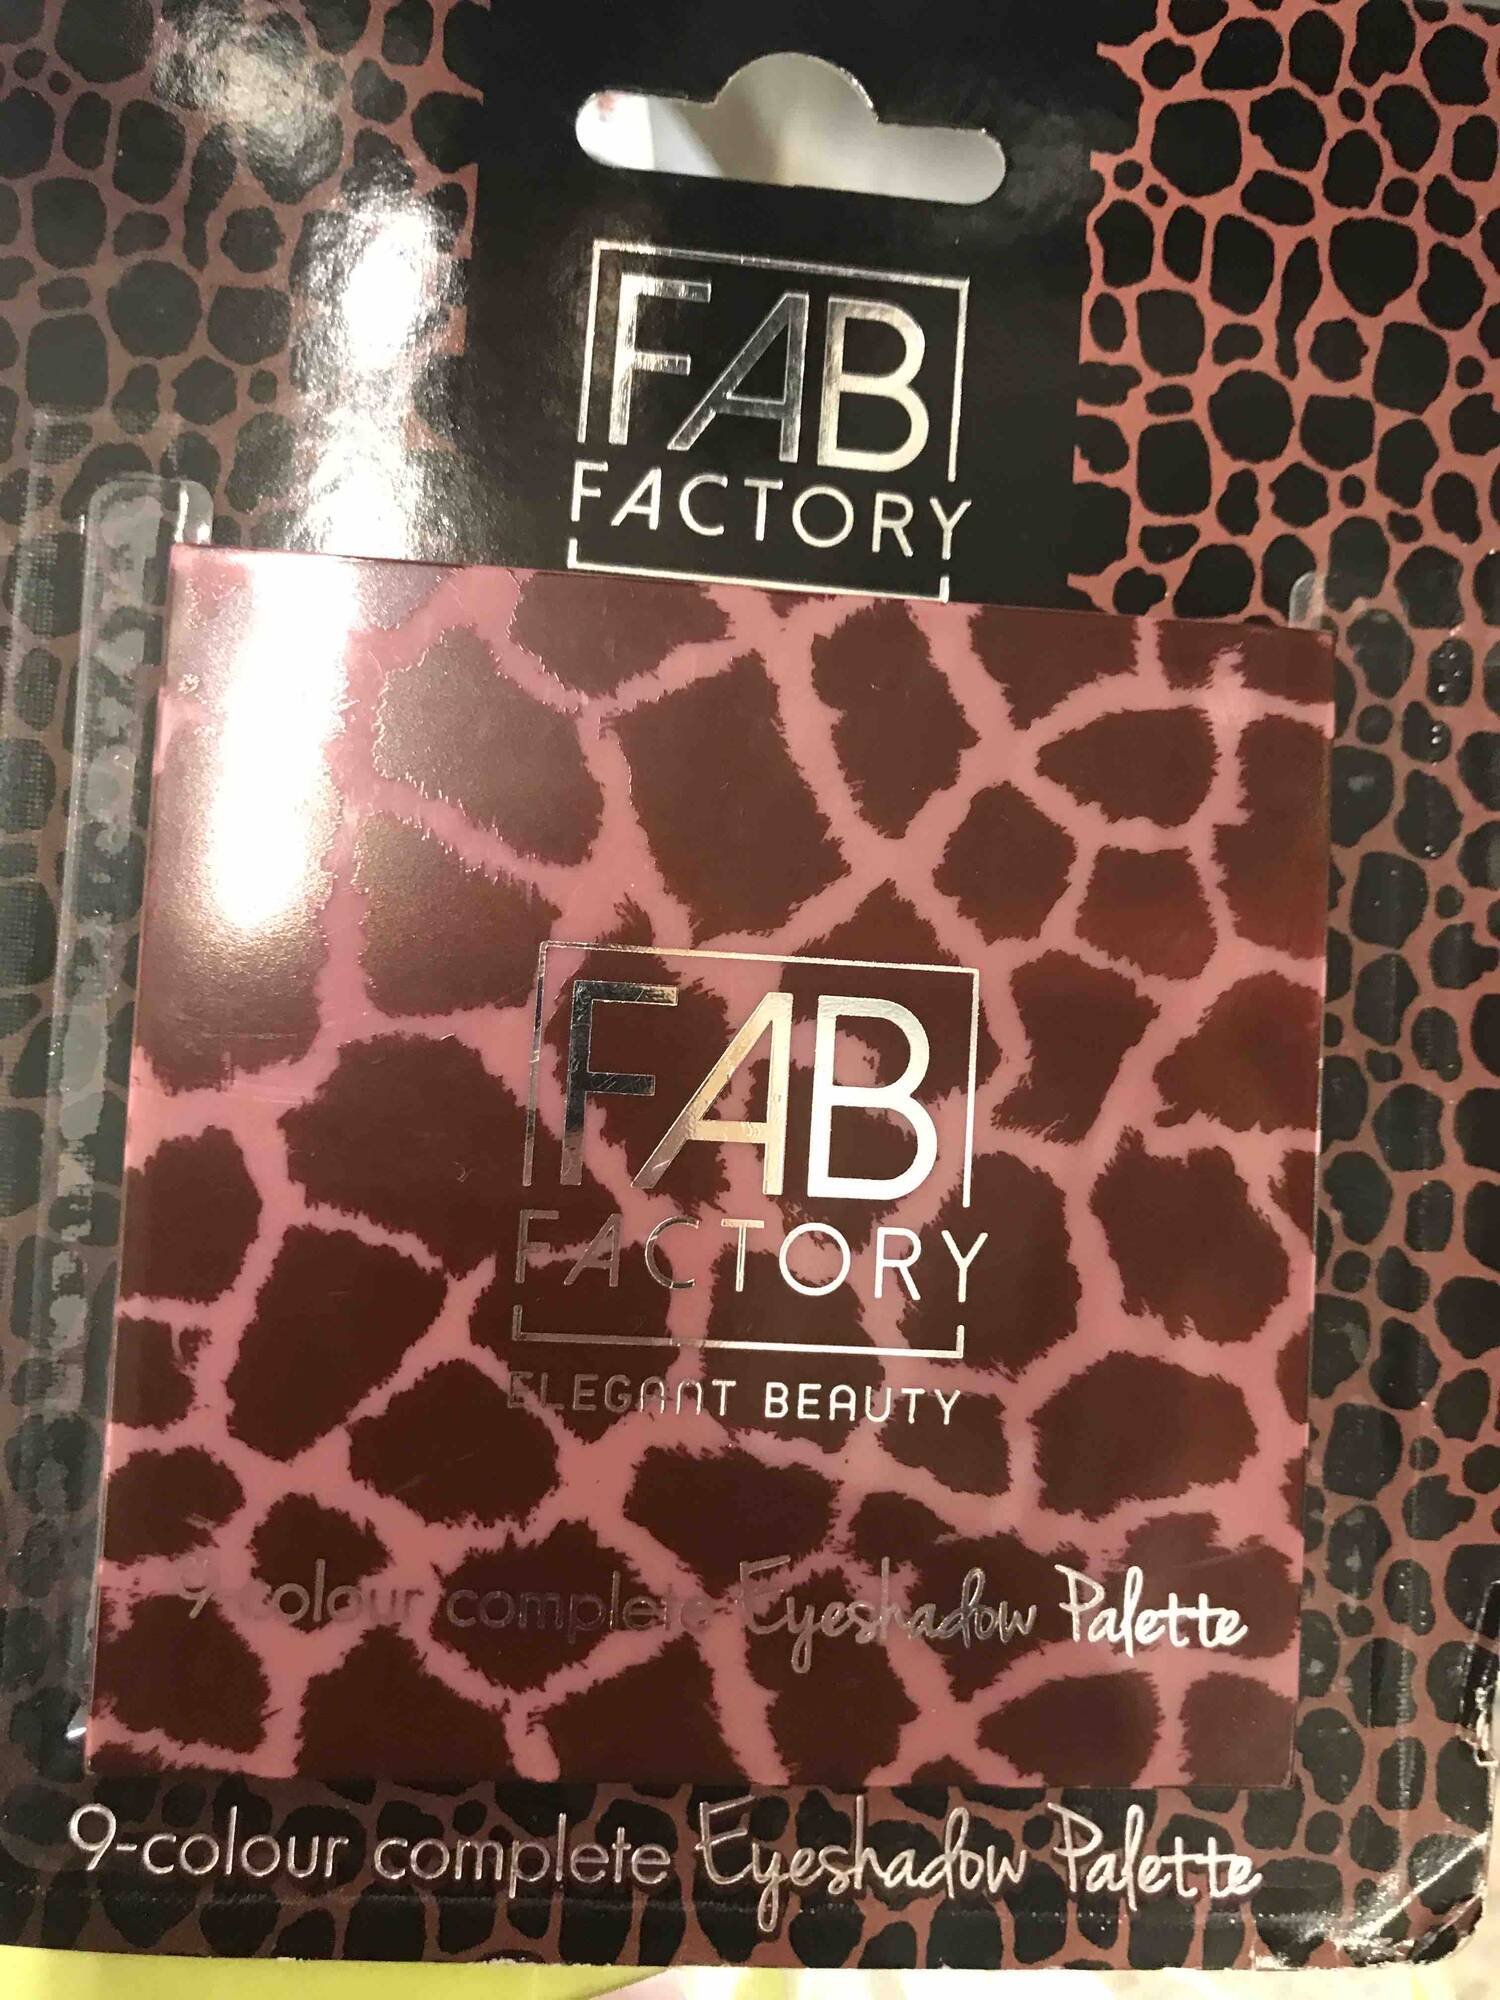 FAB FACTORY - 9-colour complete eyeshadow palette